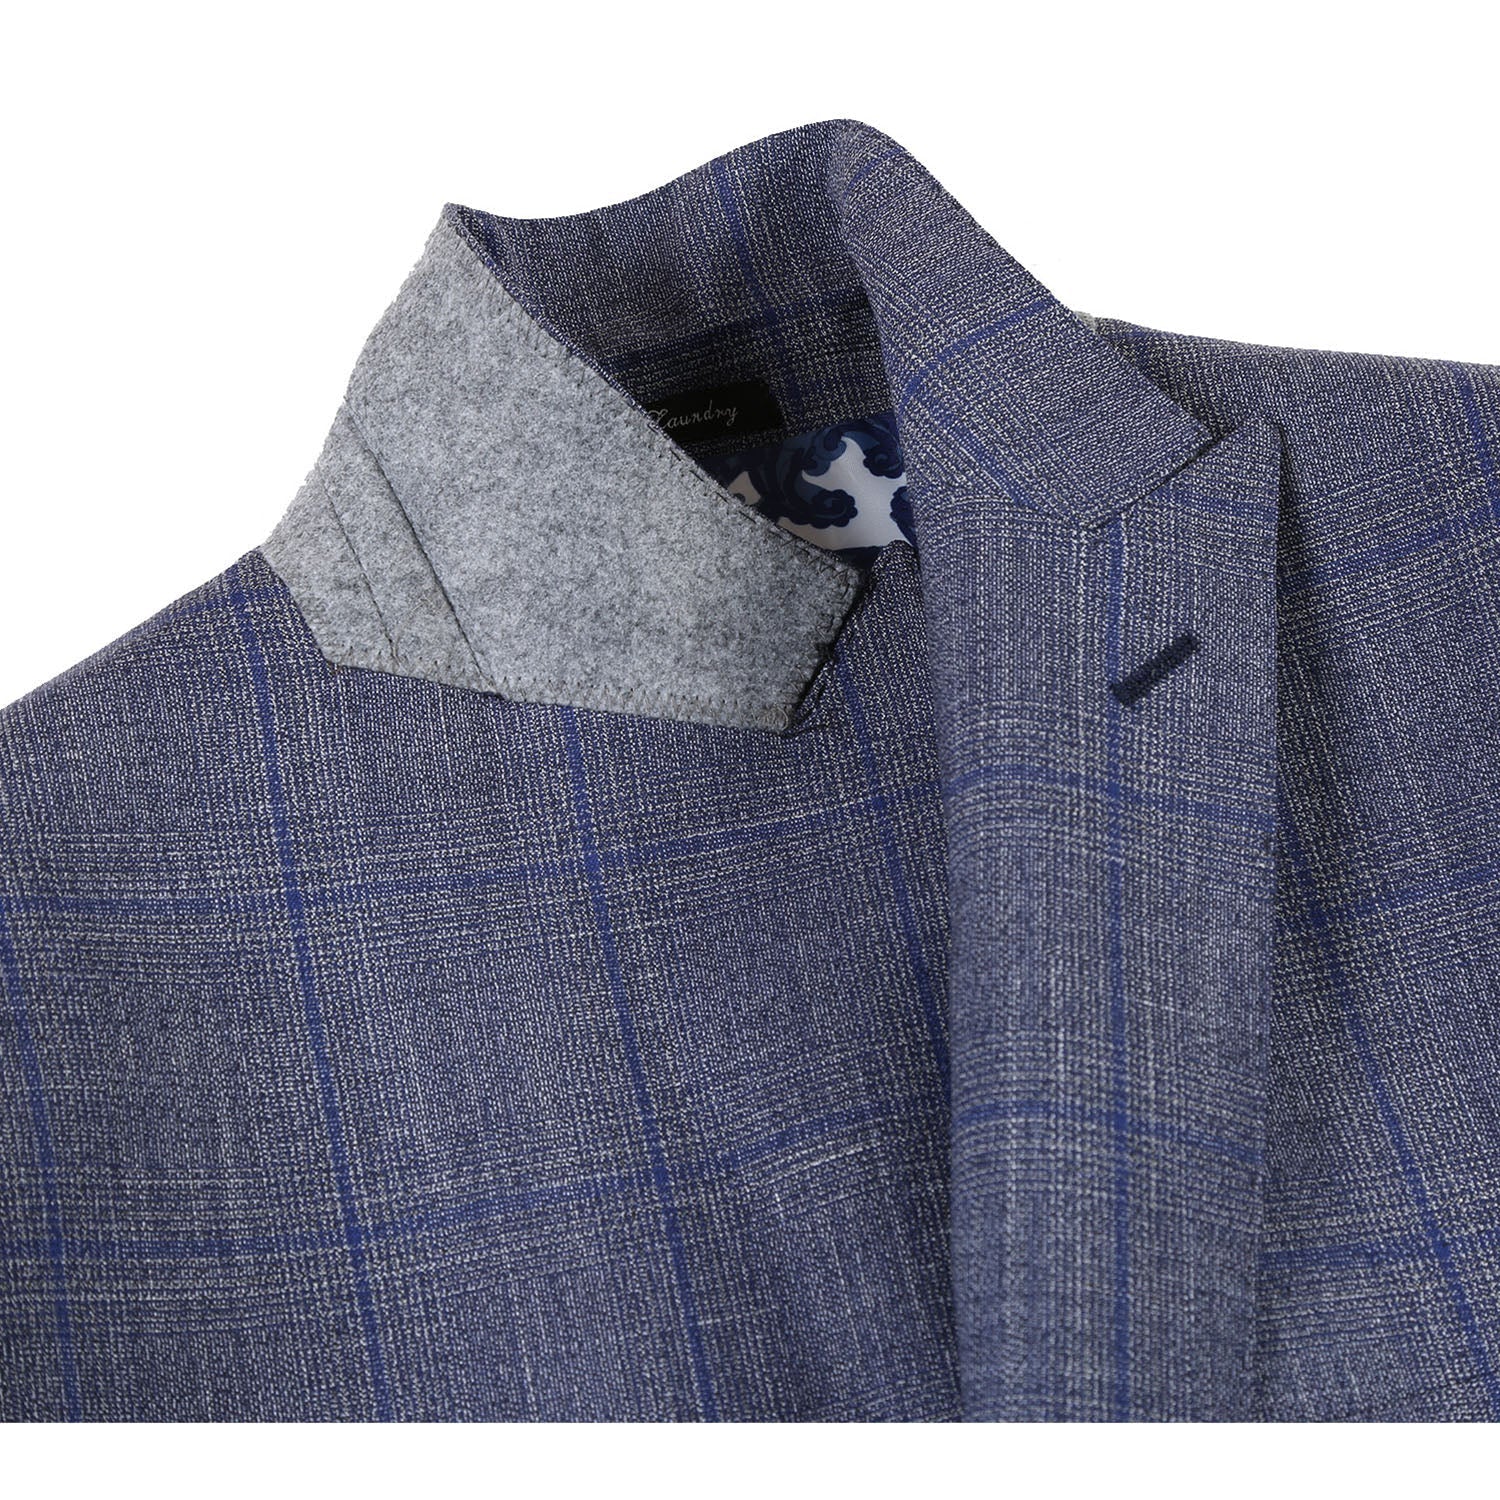 Wool, Silk, and Linen Double Breasted SLIM FIT Suit in Grey and Blue Windowpane Check (Short, Regular, and Long Available) by English Laundry